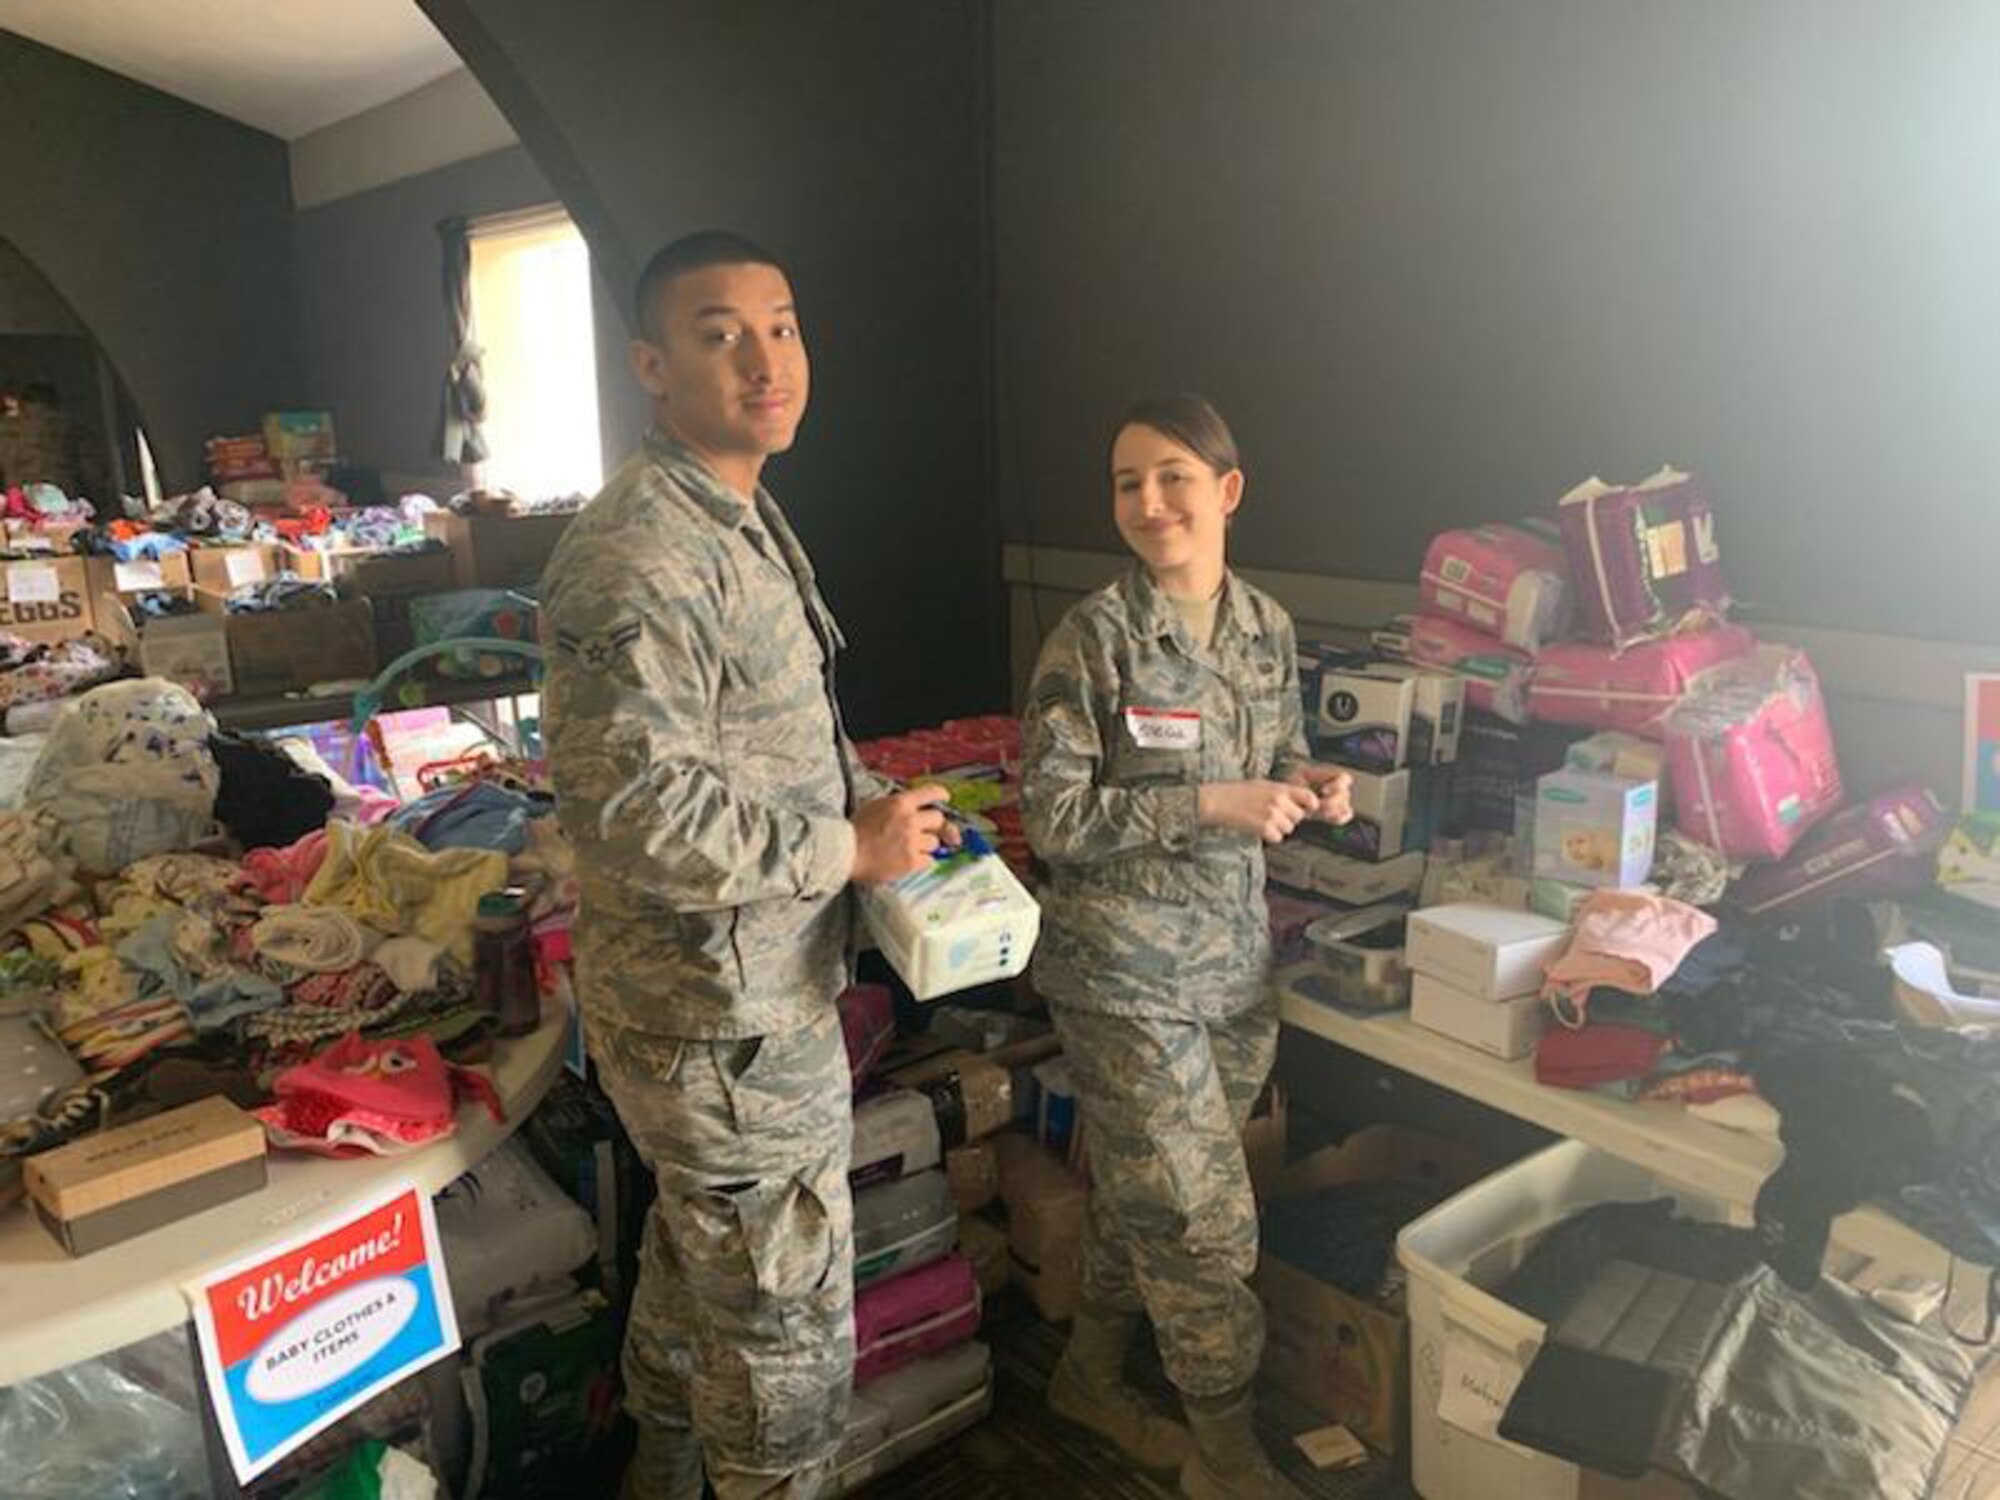 U.S. Air Force Airmen with the 20th Intelligence Squadron, 363rd Intelligence, Surveillance and Reconnaissance Wing, sort and distribute clothes, cleaning supplies, toys and food at the Bellevue Christian Center in Nebraska, March 18-21, 2019. Airmen, civilian and industry partners from the 20th IS volunteered to provide assistance and relief efforts to those affected by recent flooding in Nebraska and Iowa. (Courtesy photo)